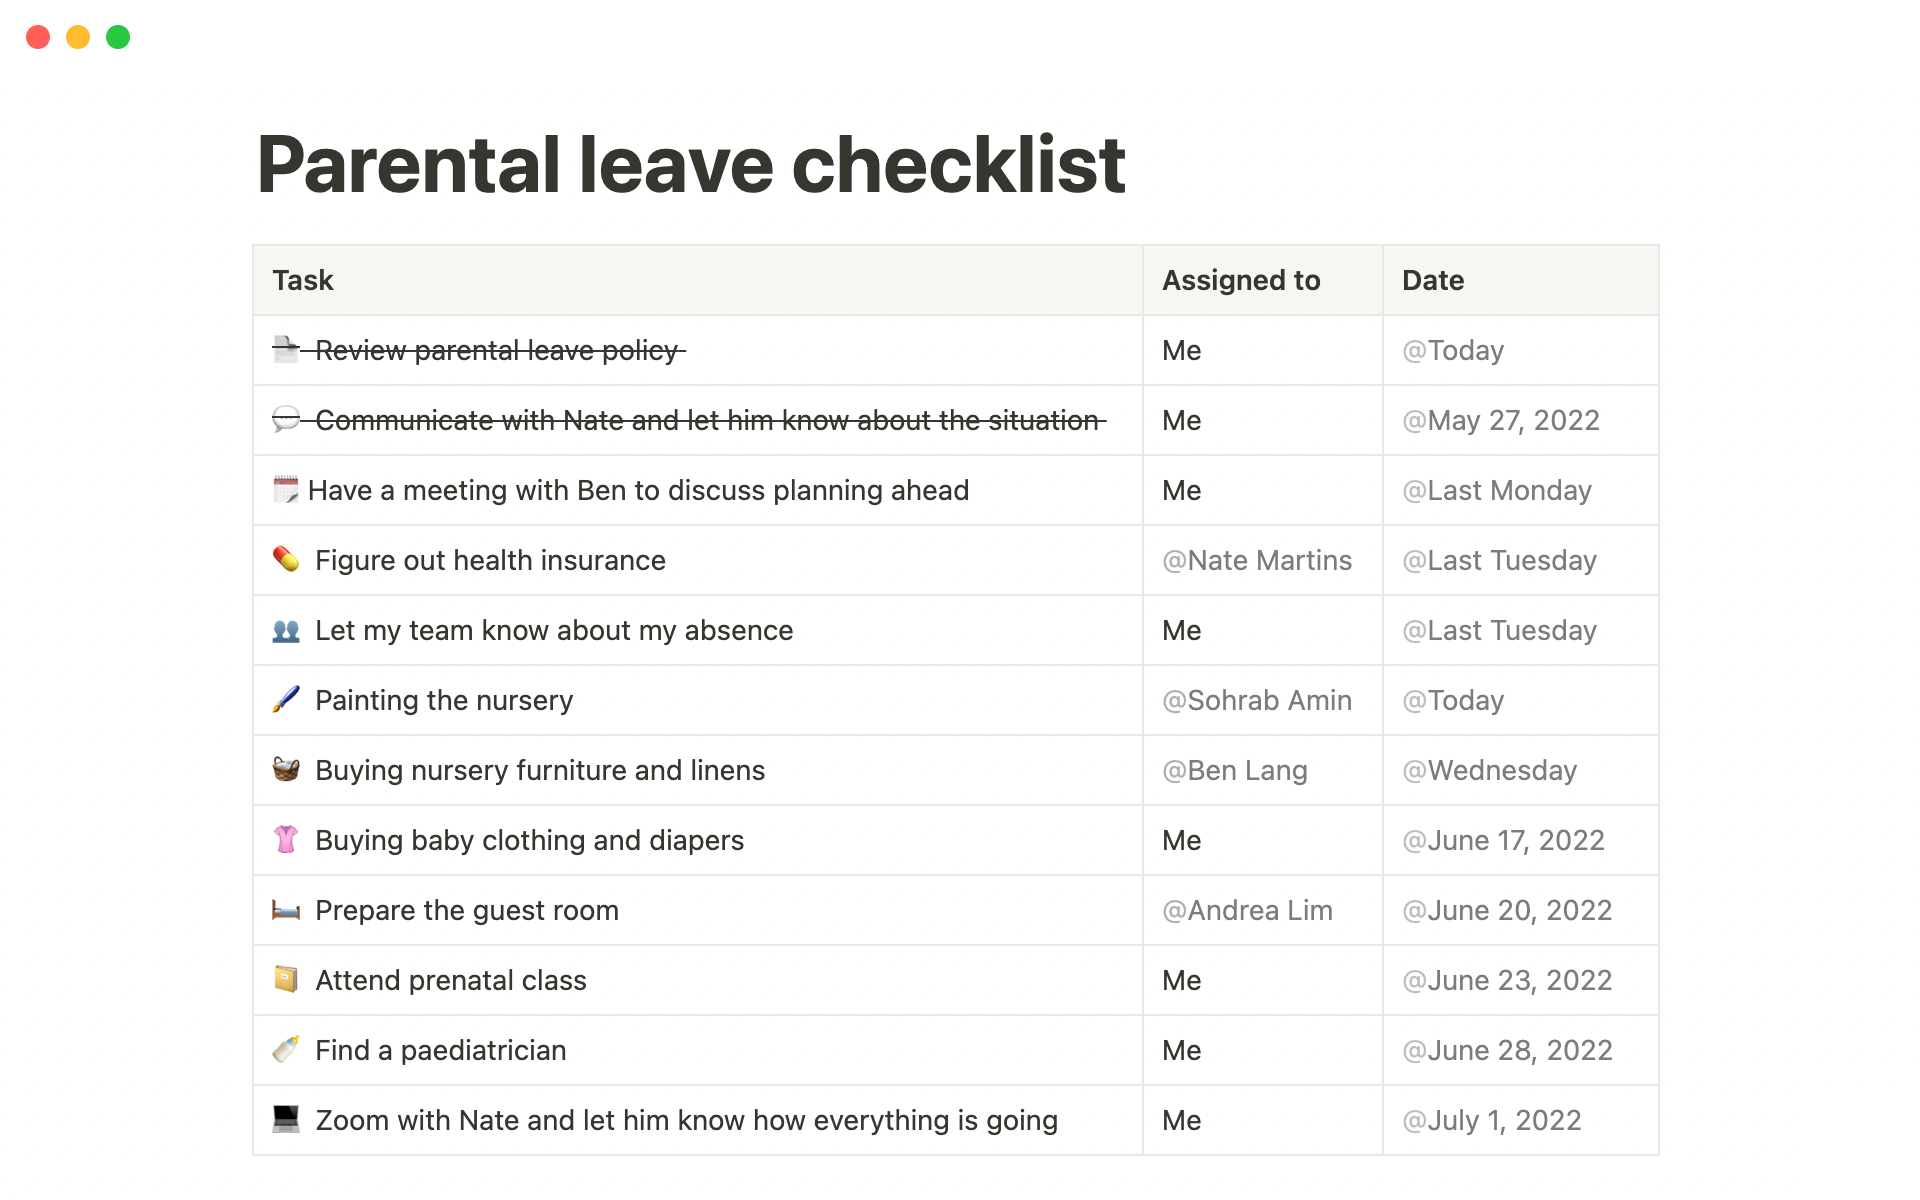 Baby on the way? You’ve got a lot on your mind. Use this template to keep track of all the work and personal tasks related to your impending bundle of joy. 